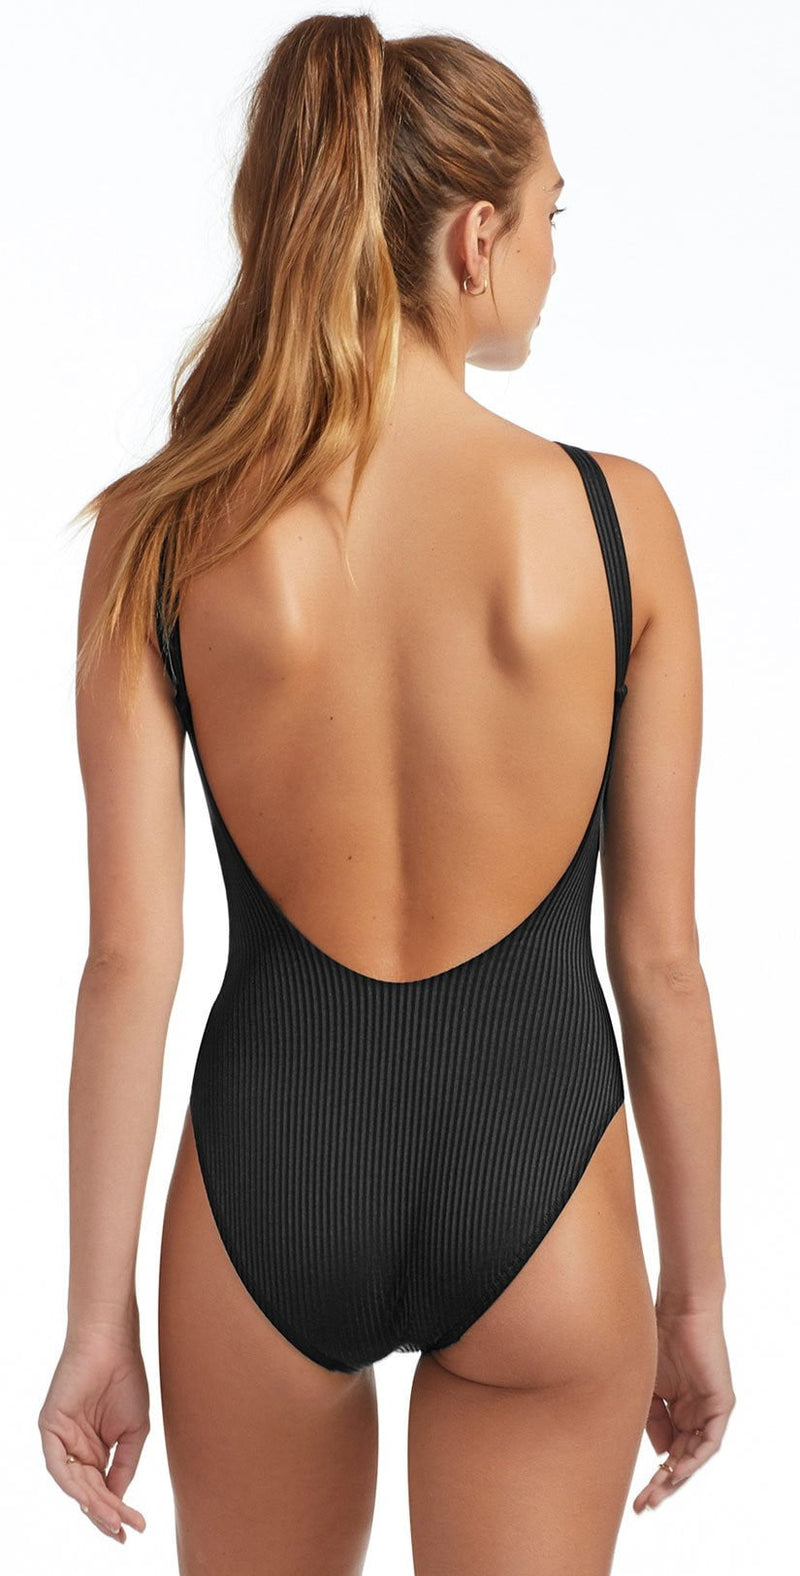 Vitamin A EcoRib Leah Full Coverage One Piece Swimsuit in Black